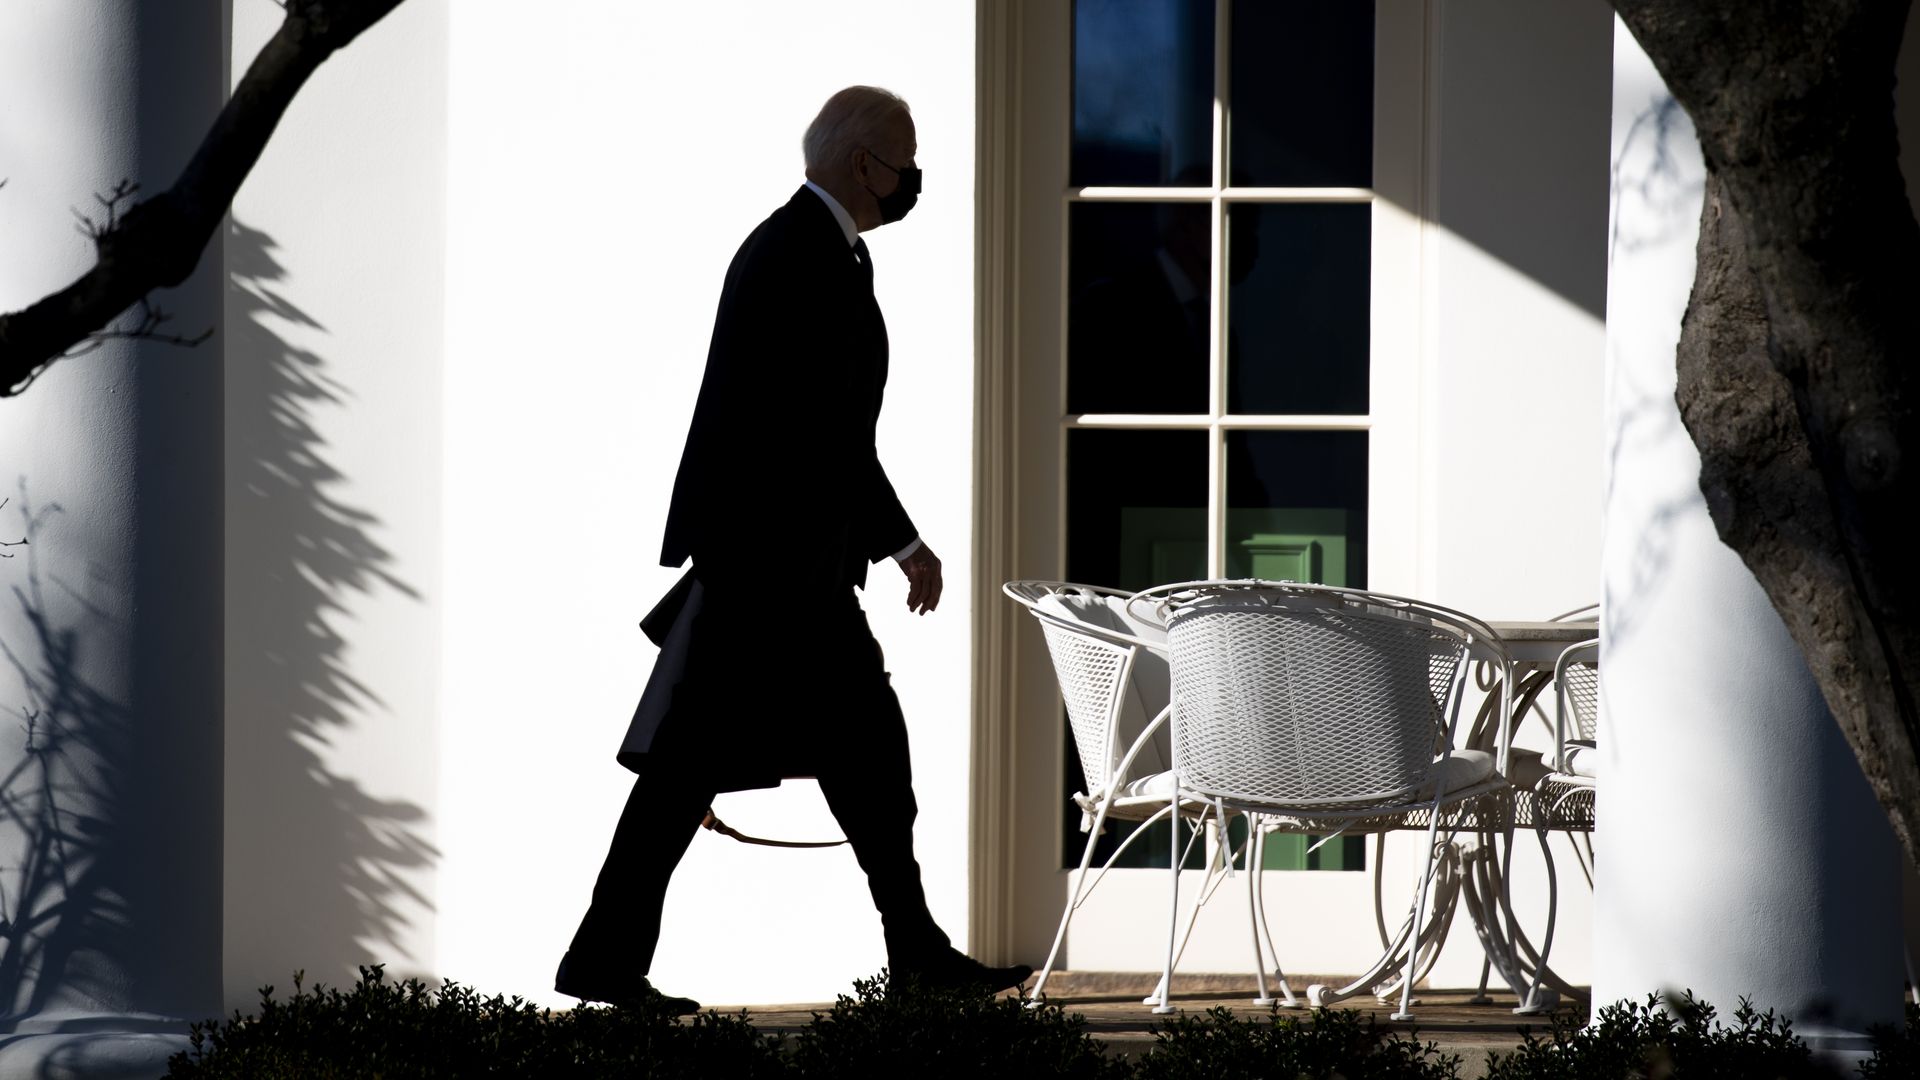 President Biden is seen walking back to the Oval Office after arriving at the White House from Camp David.